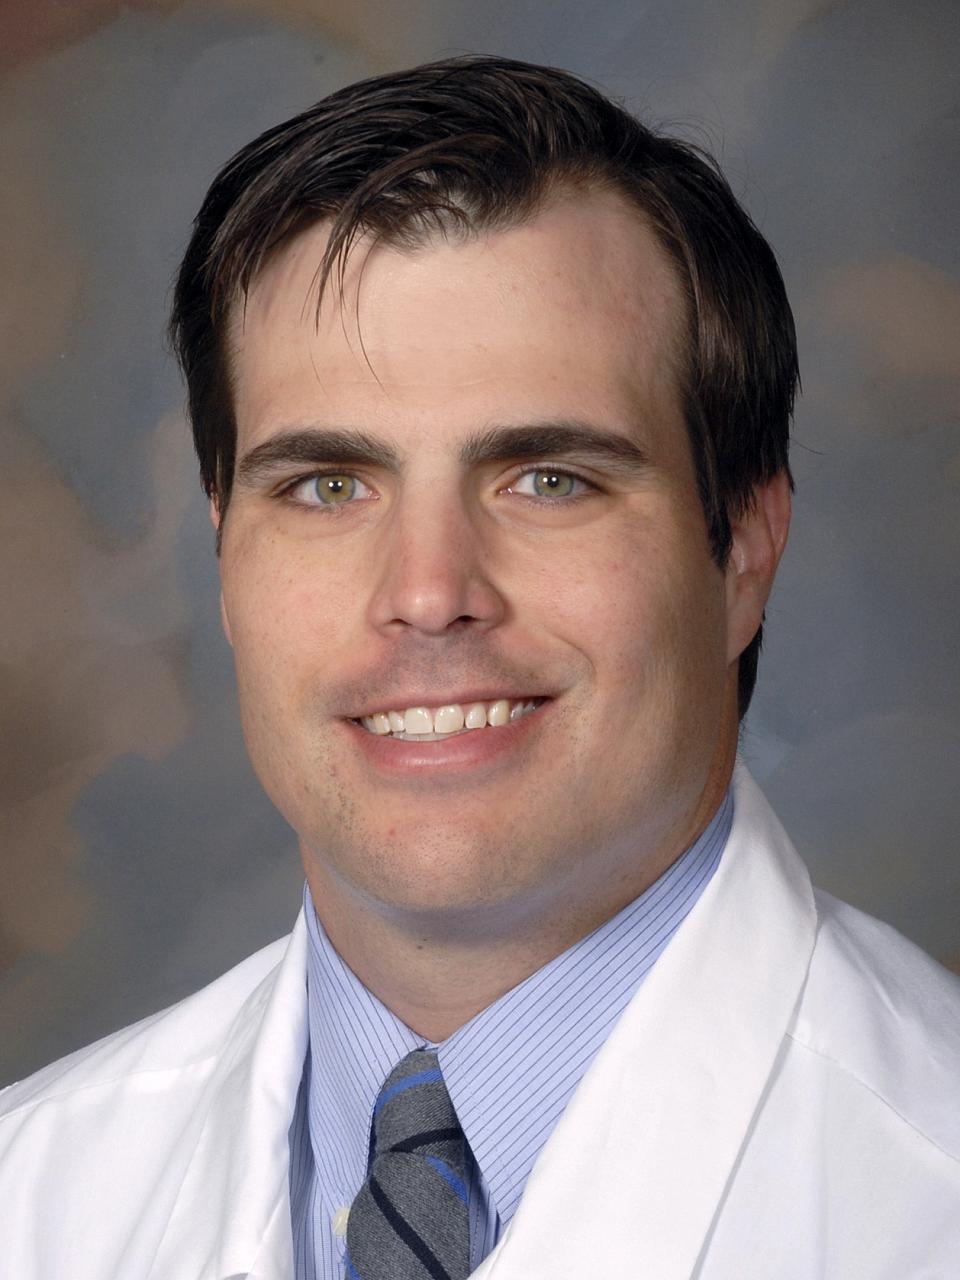 A man with short, dark hair in a white medical coat.